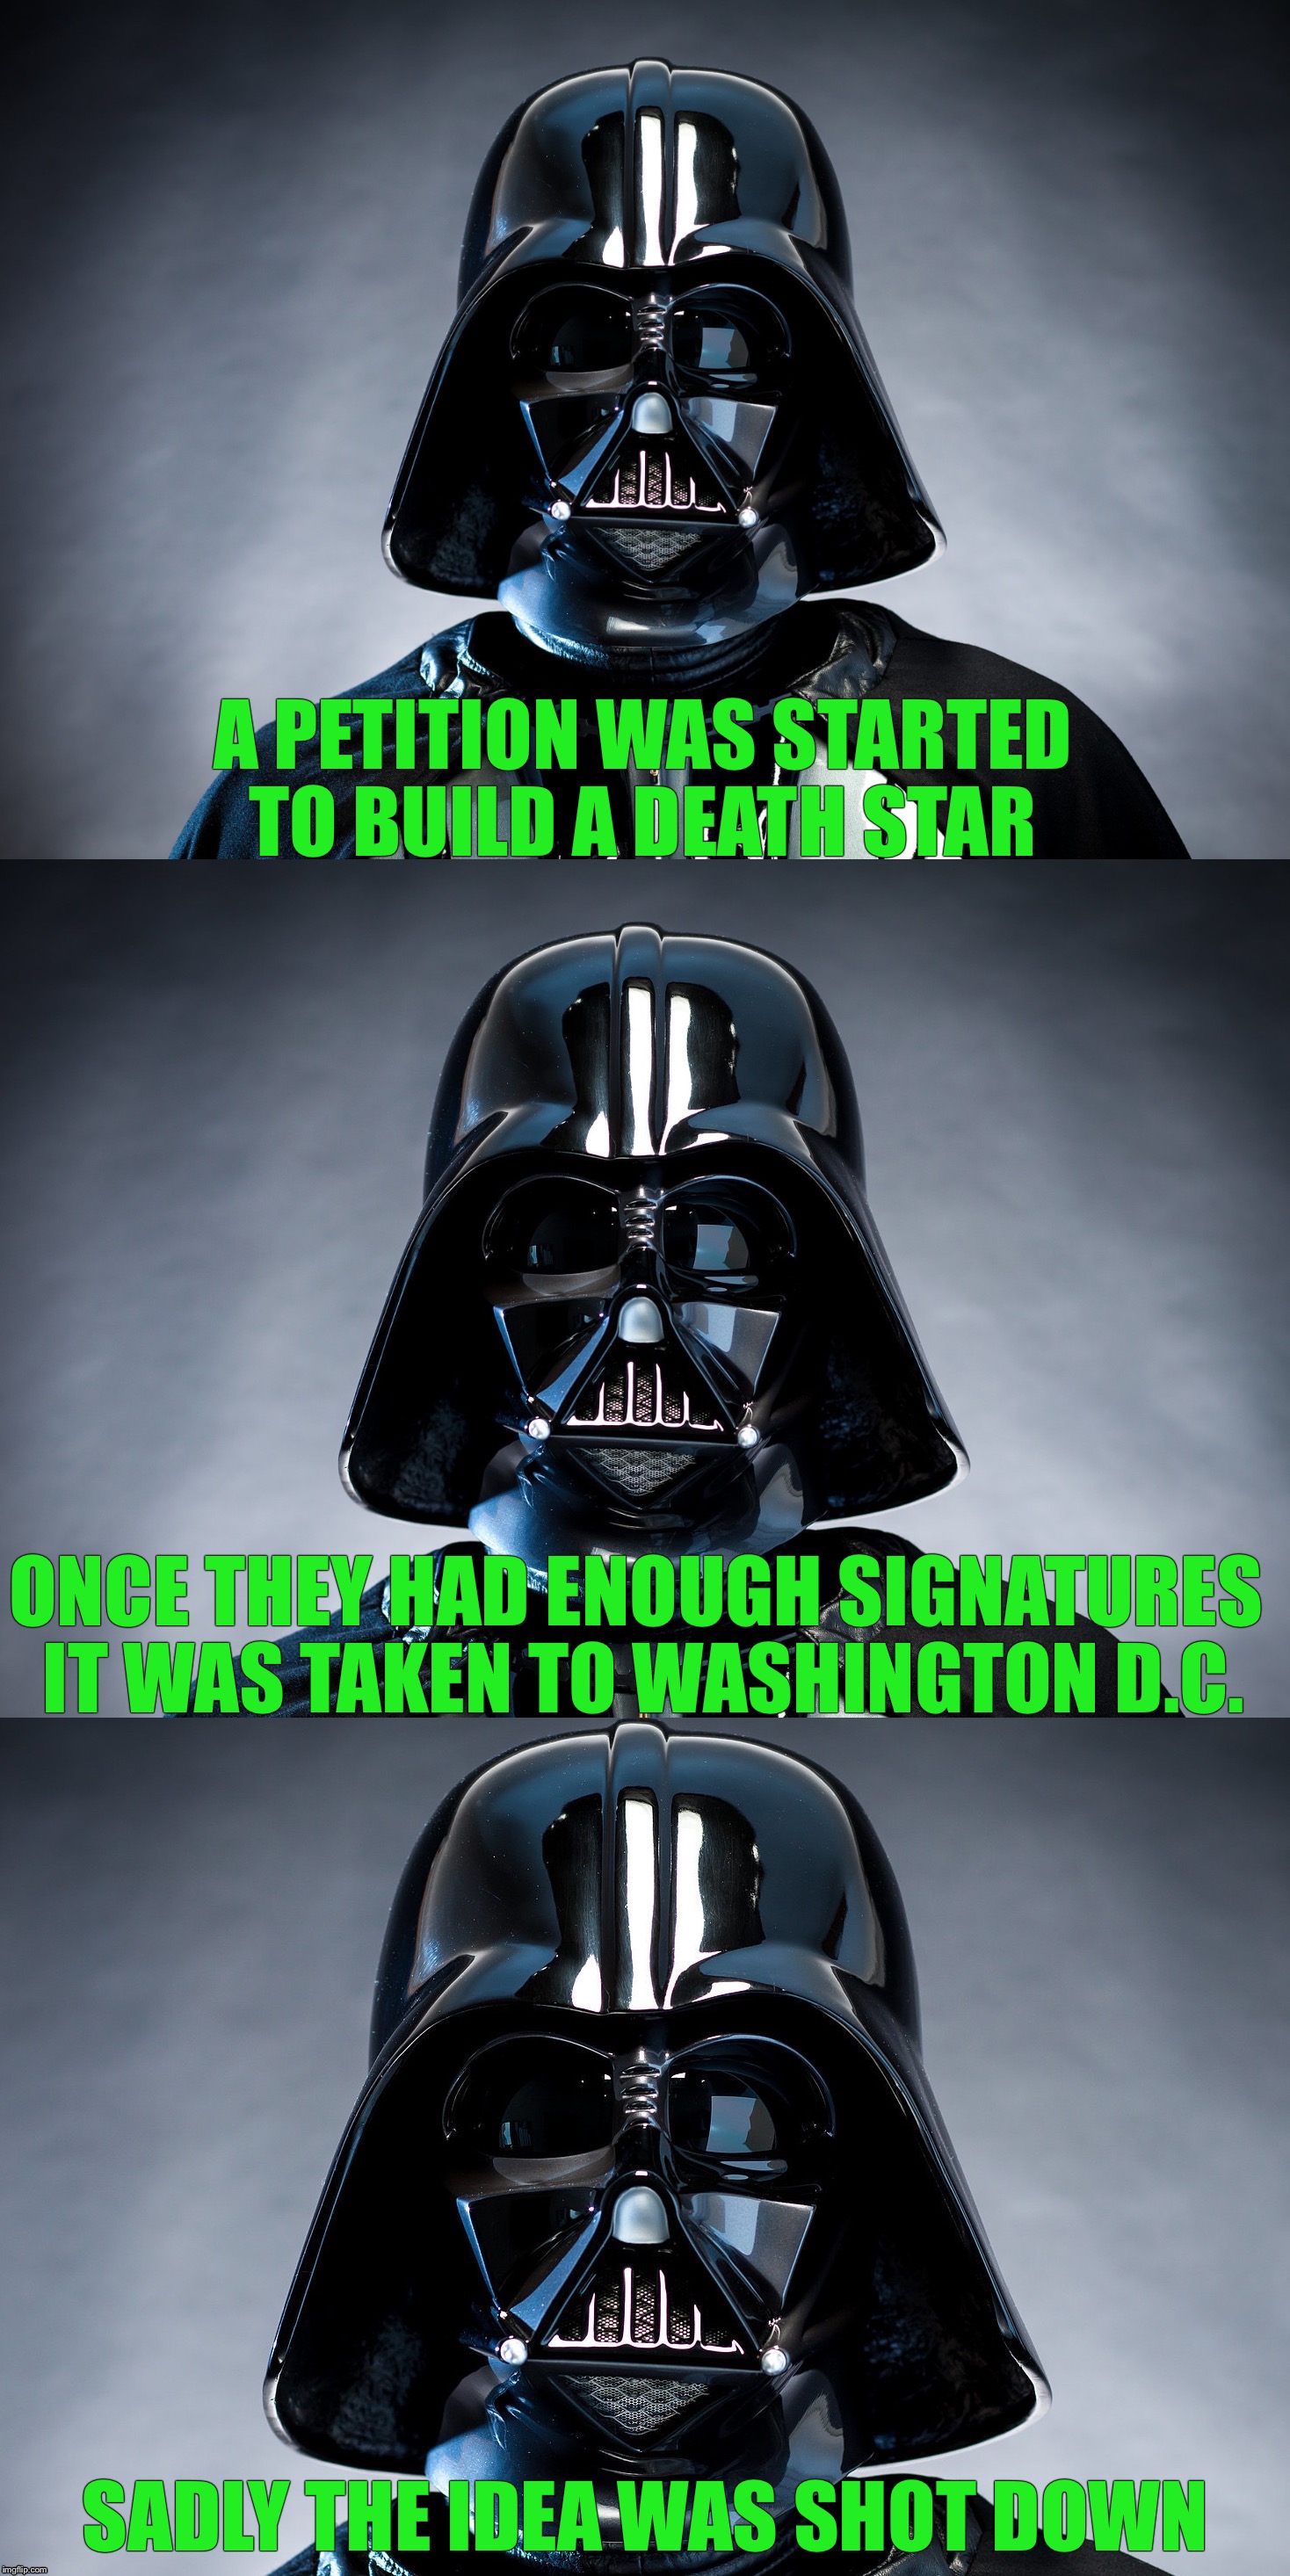 Bad pun Vader jokes the Death Star | A PETITION WAS STARTED TO BUILD A DEATH STAR; ONCE THEY HAD ENOUGH SIGNATURES IT WAS TAKEN TO WASHINGTON D.C. SADLY THE IDEA WAS SHOT DOWN | image tagged in bad pun vader,funny memes,star wars | made w/ Imgflip meme maker